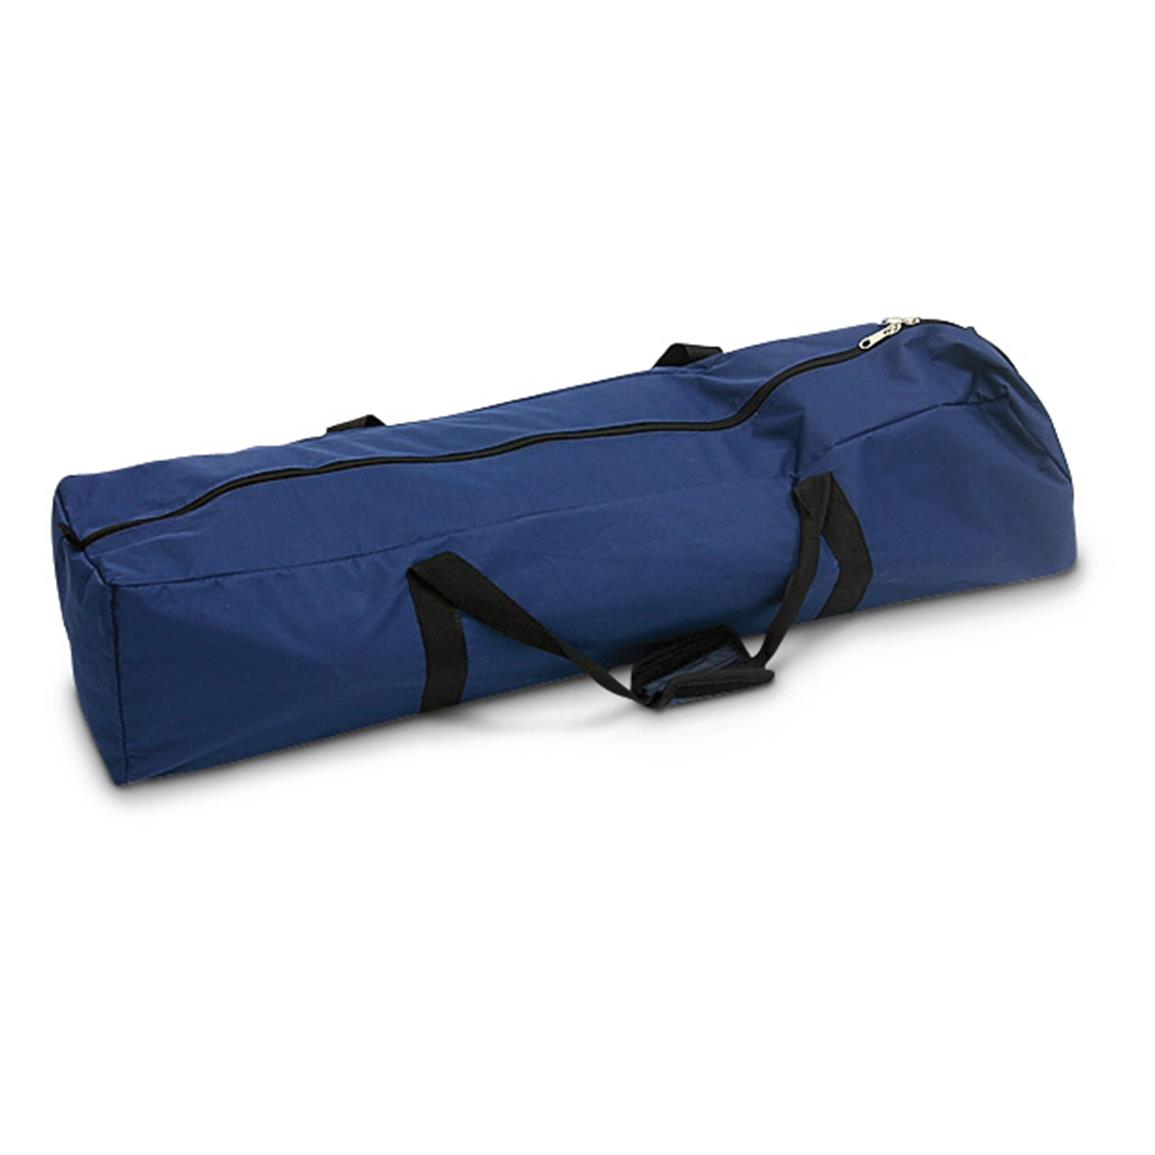 Queen Portable Airbed - 621937, Air Beds at Sportsman's Guide